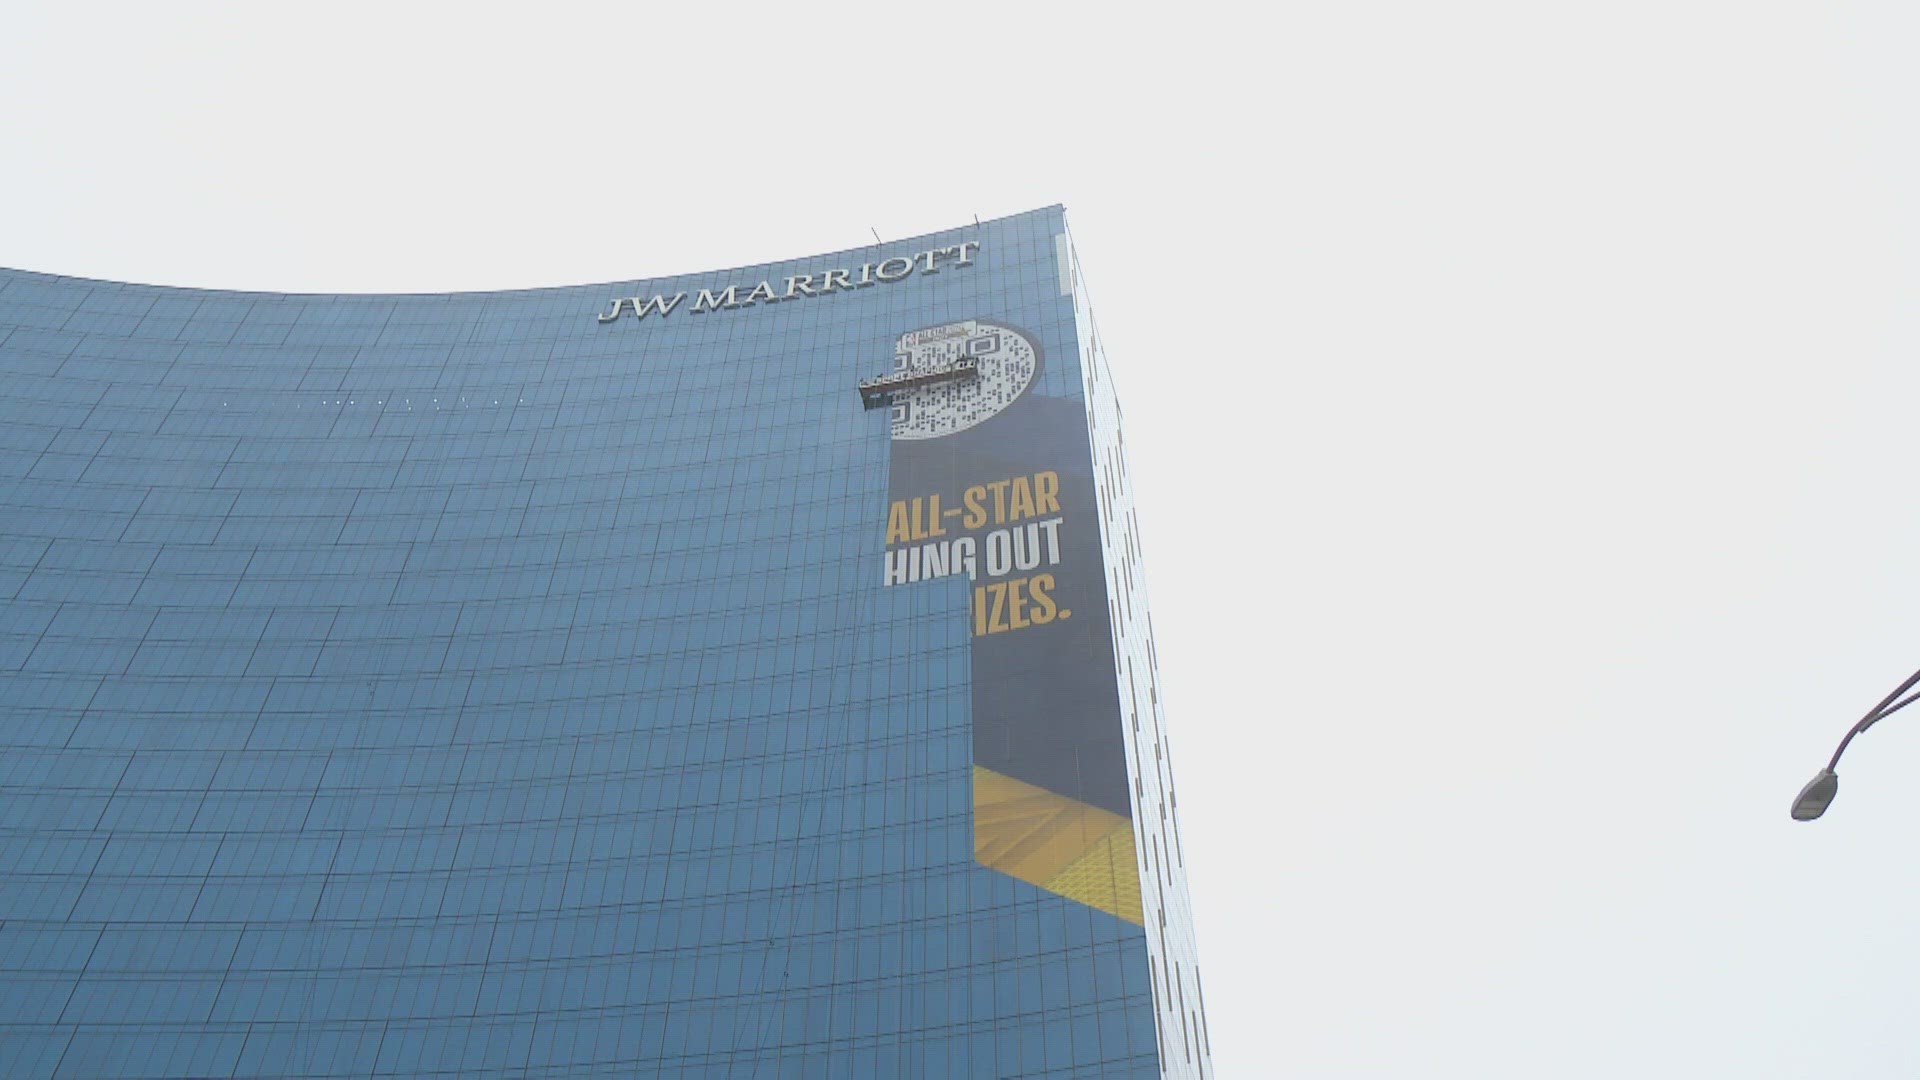 13News reporter Lauren Kostiuk breaks down what scanning the QR code on the JW Marriott will do for NBA fans during the NBA All-Star Weekend in Indianapolis.